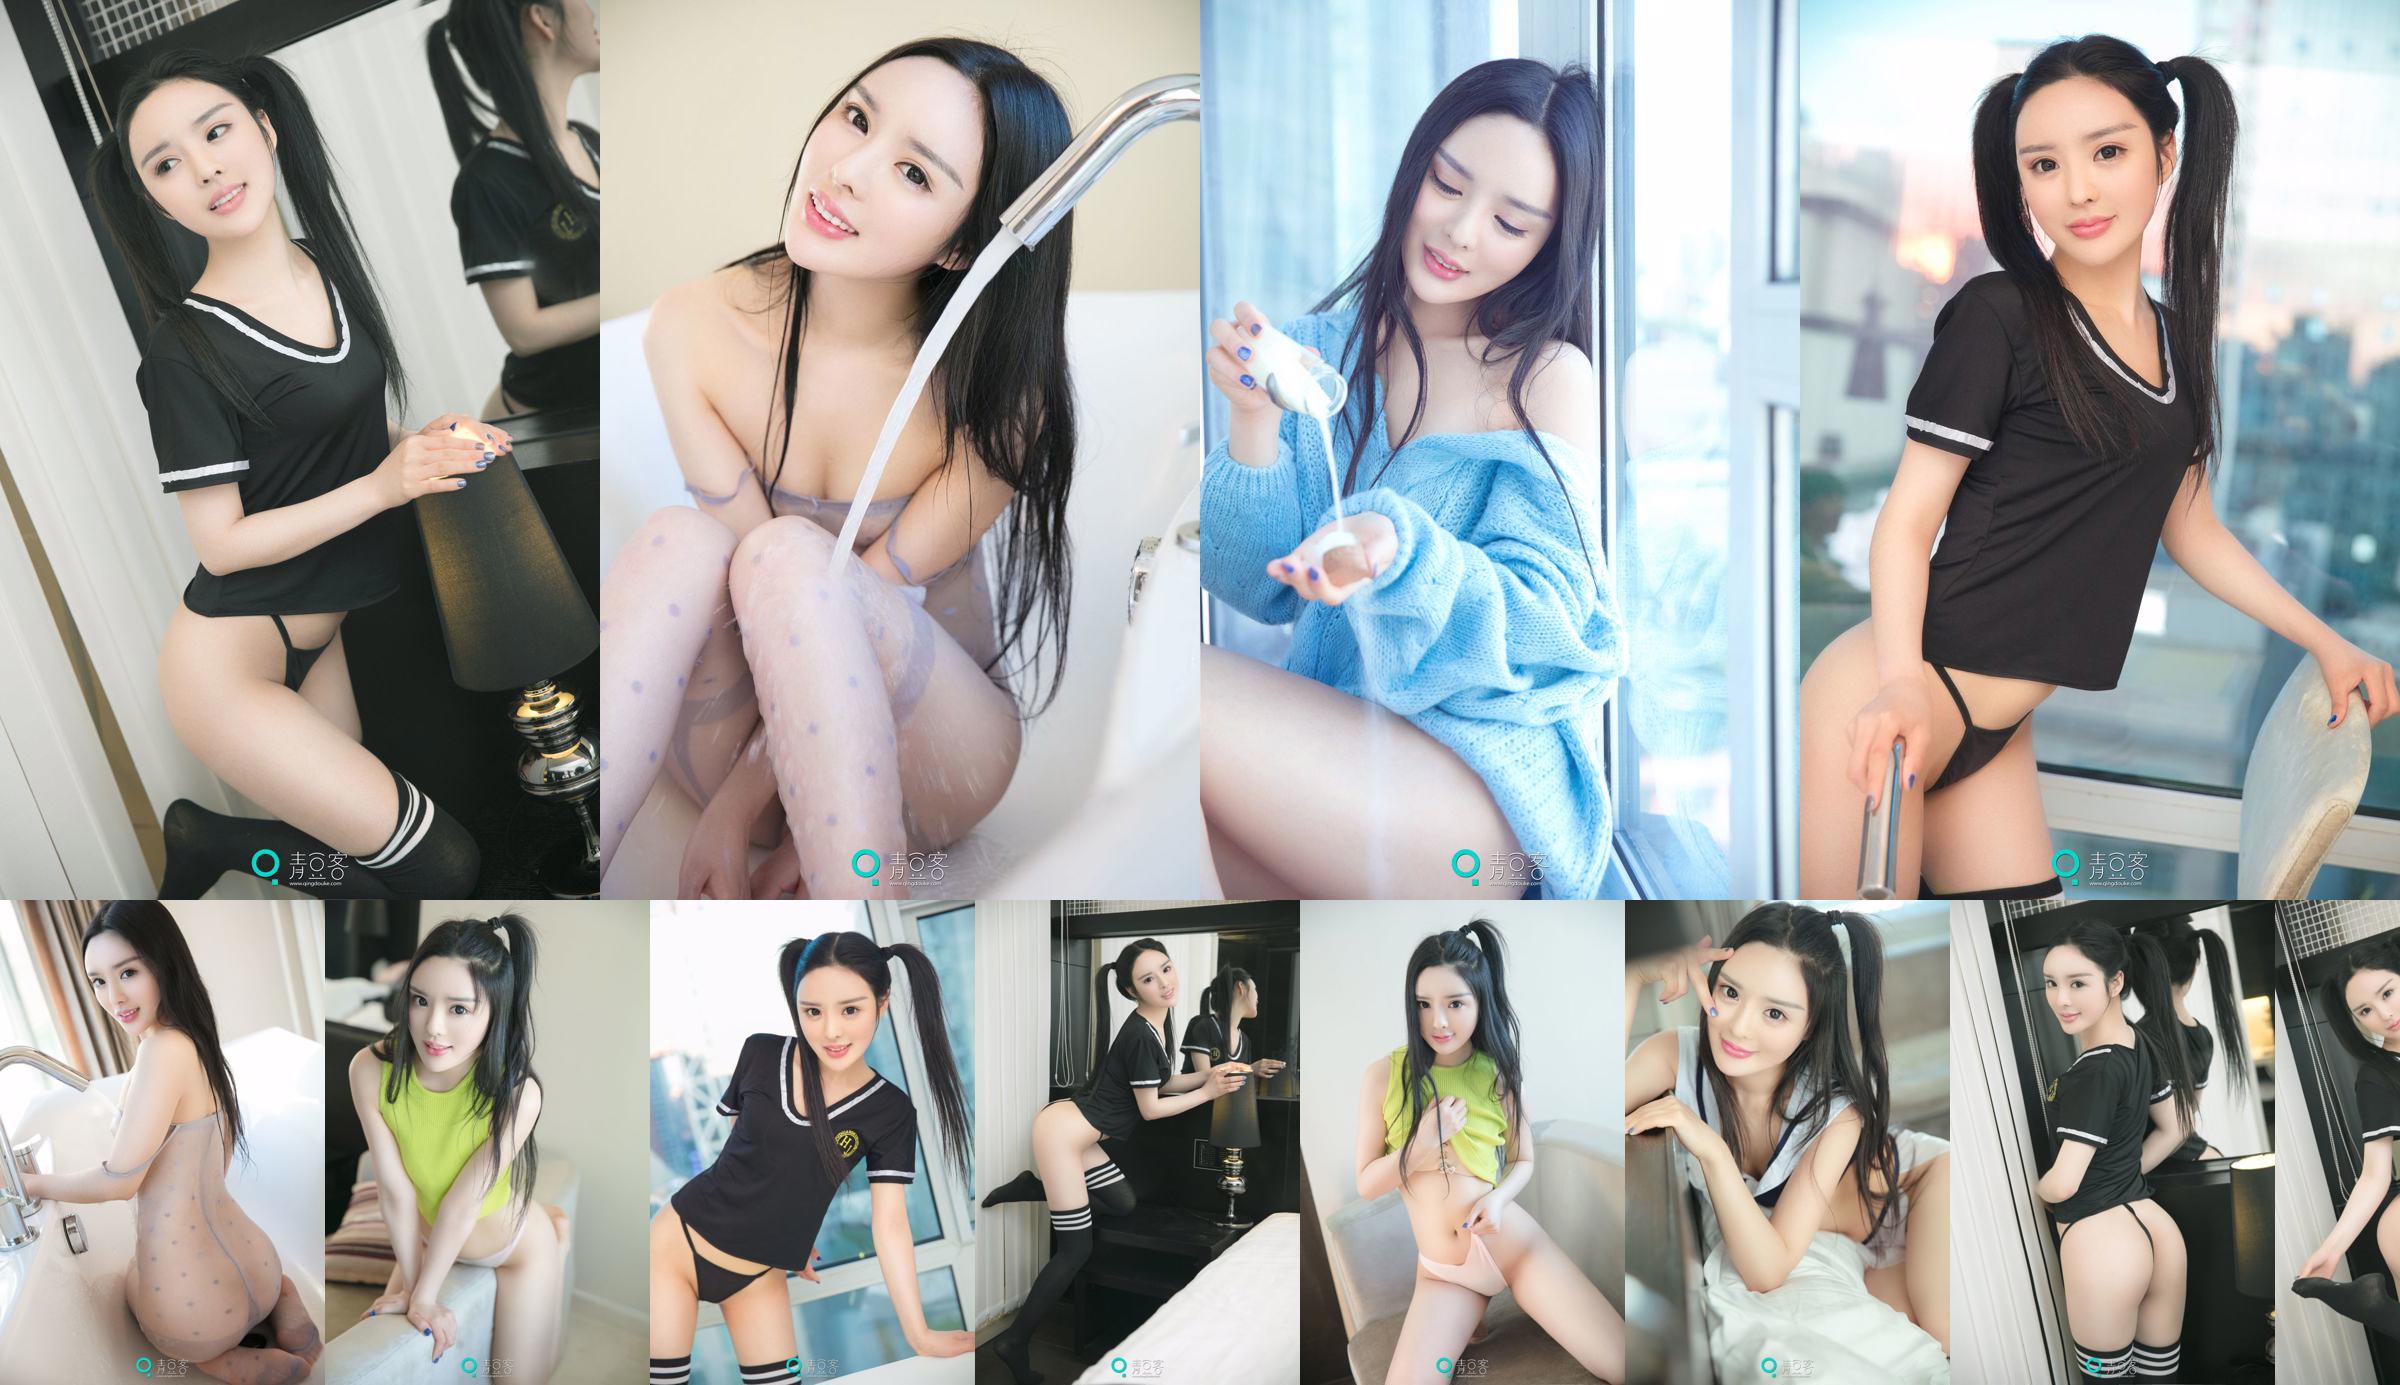 Xiao Di "The Temptation of a Playful Girl" [Qing Dou Ke] No.325aed Page 2